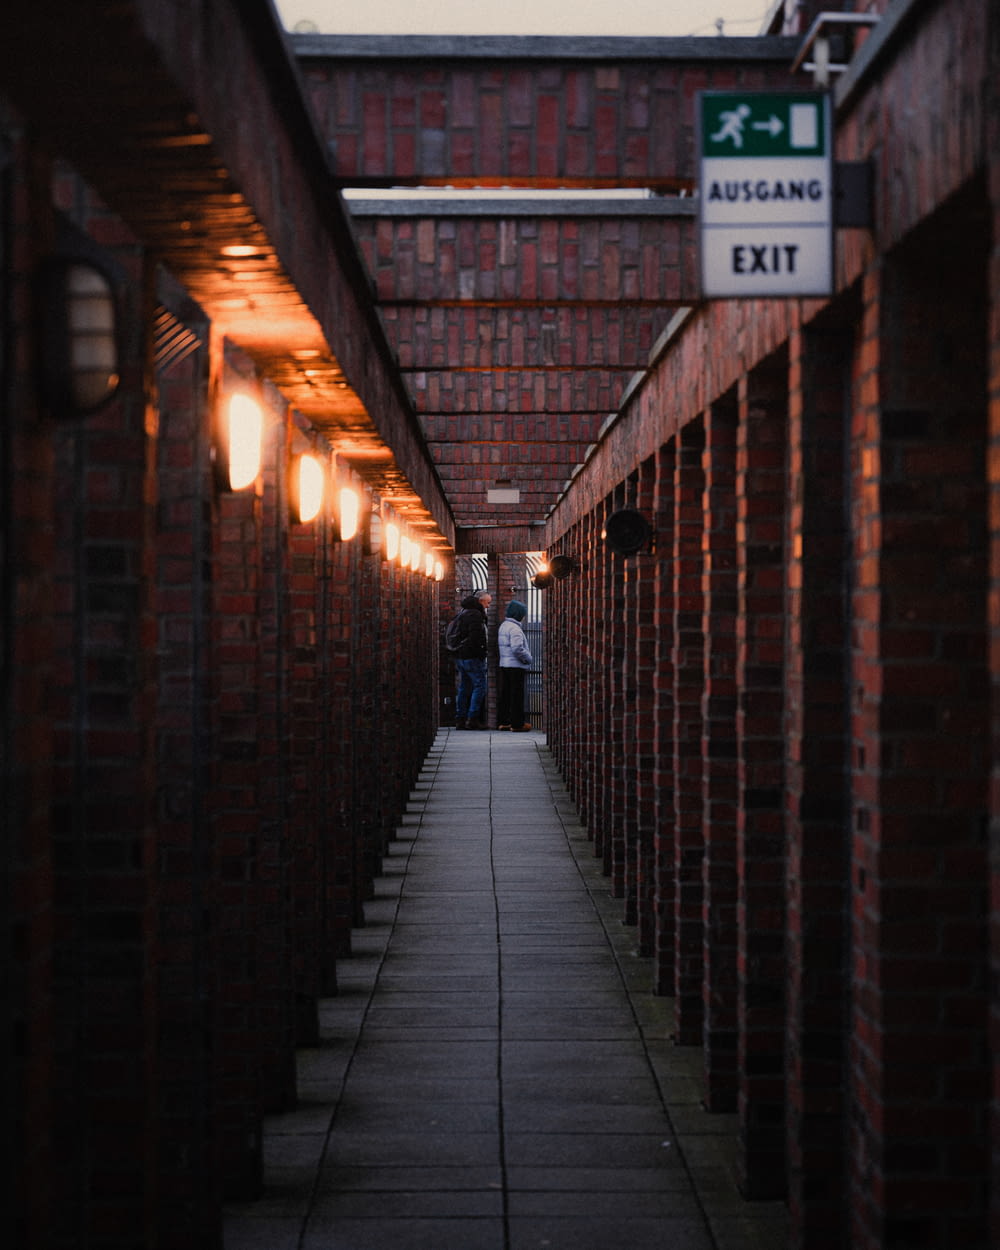 a long brick walkway with a exit sign on it